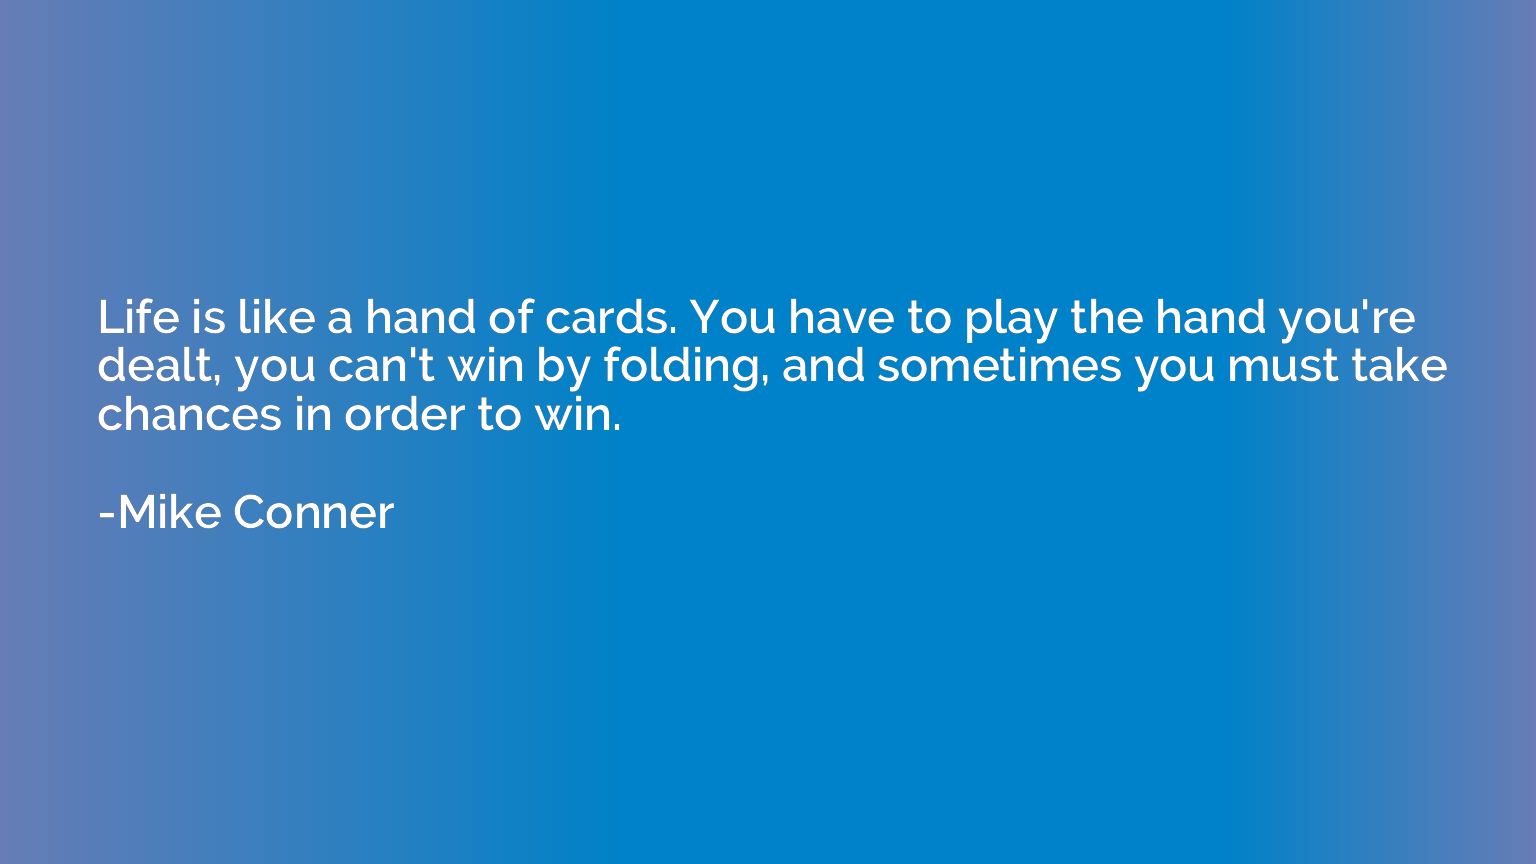 Life is like a hand of cards. You have to play the hand you'